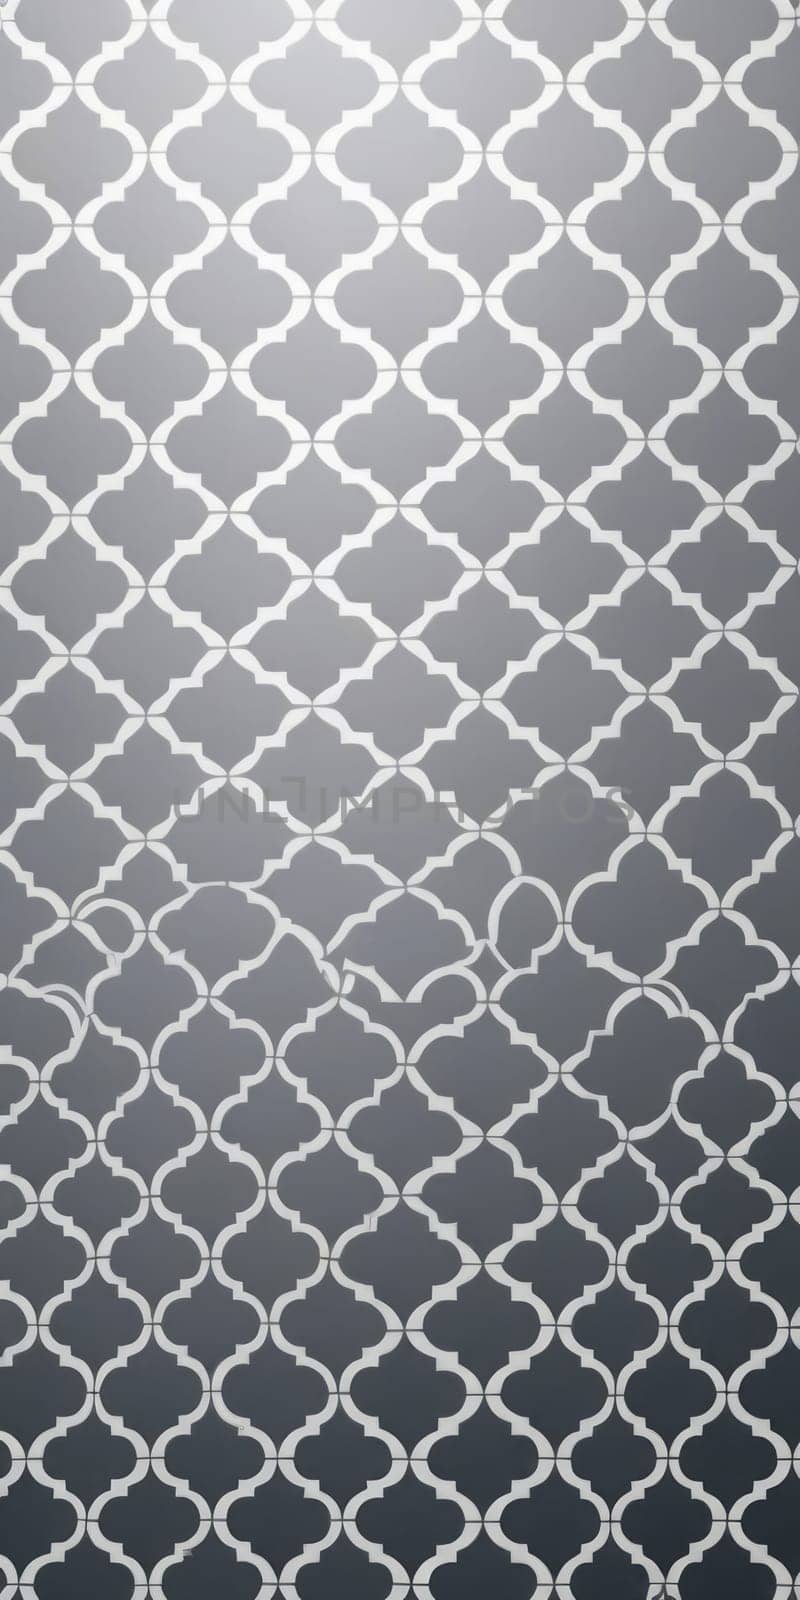 Quatrefoil Shapes in White and Grey by nkotlyar